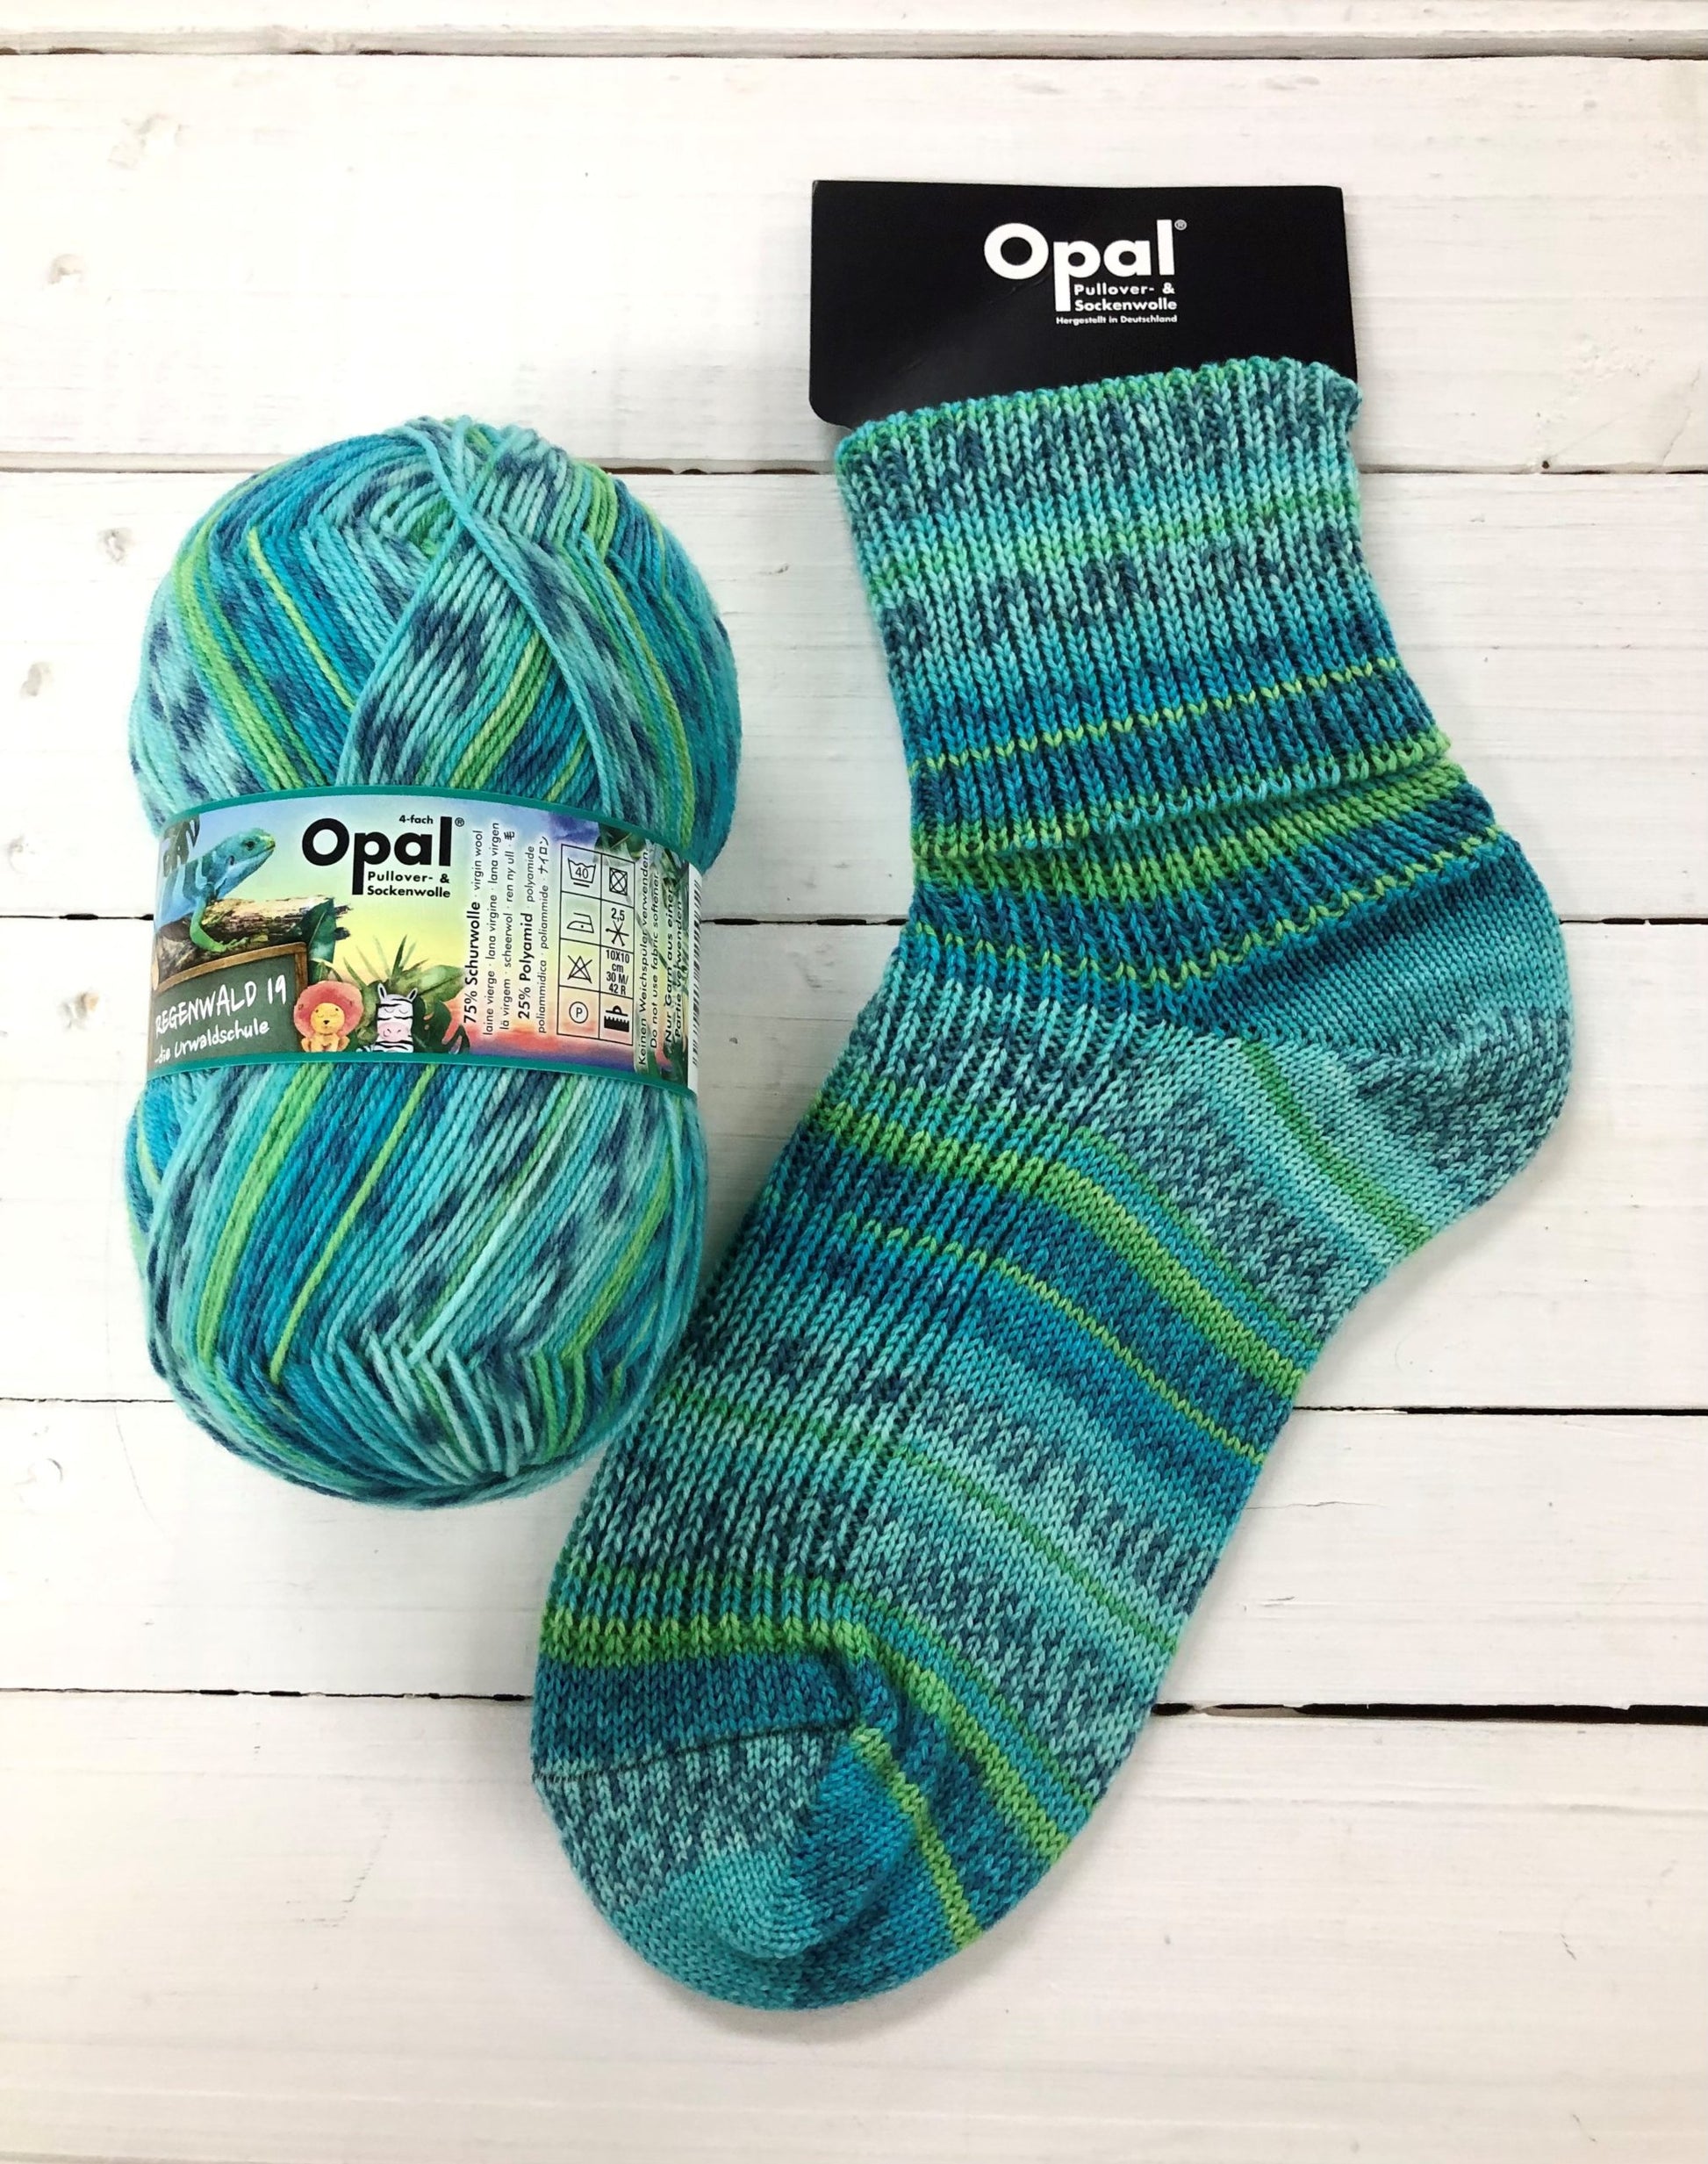 11337 - Bright teal, turquoise and green self striping sock with grey speckle.